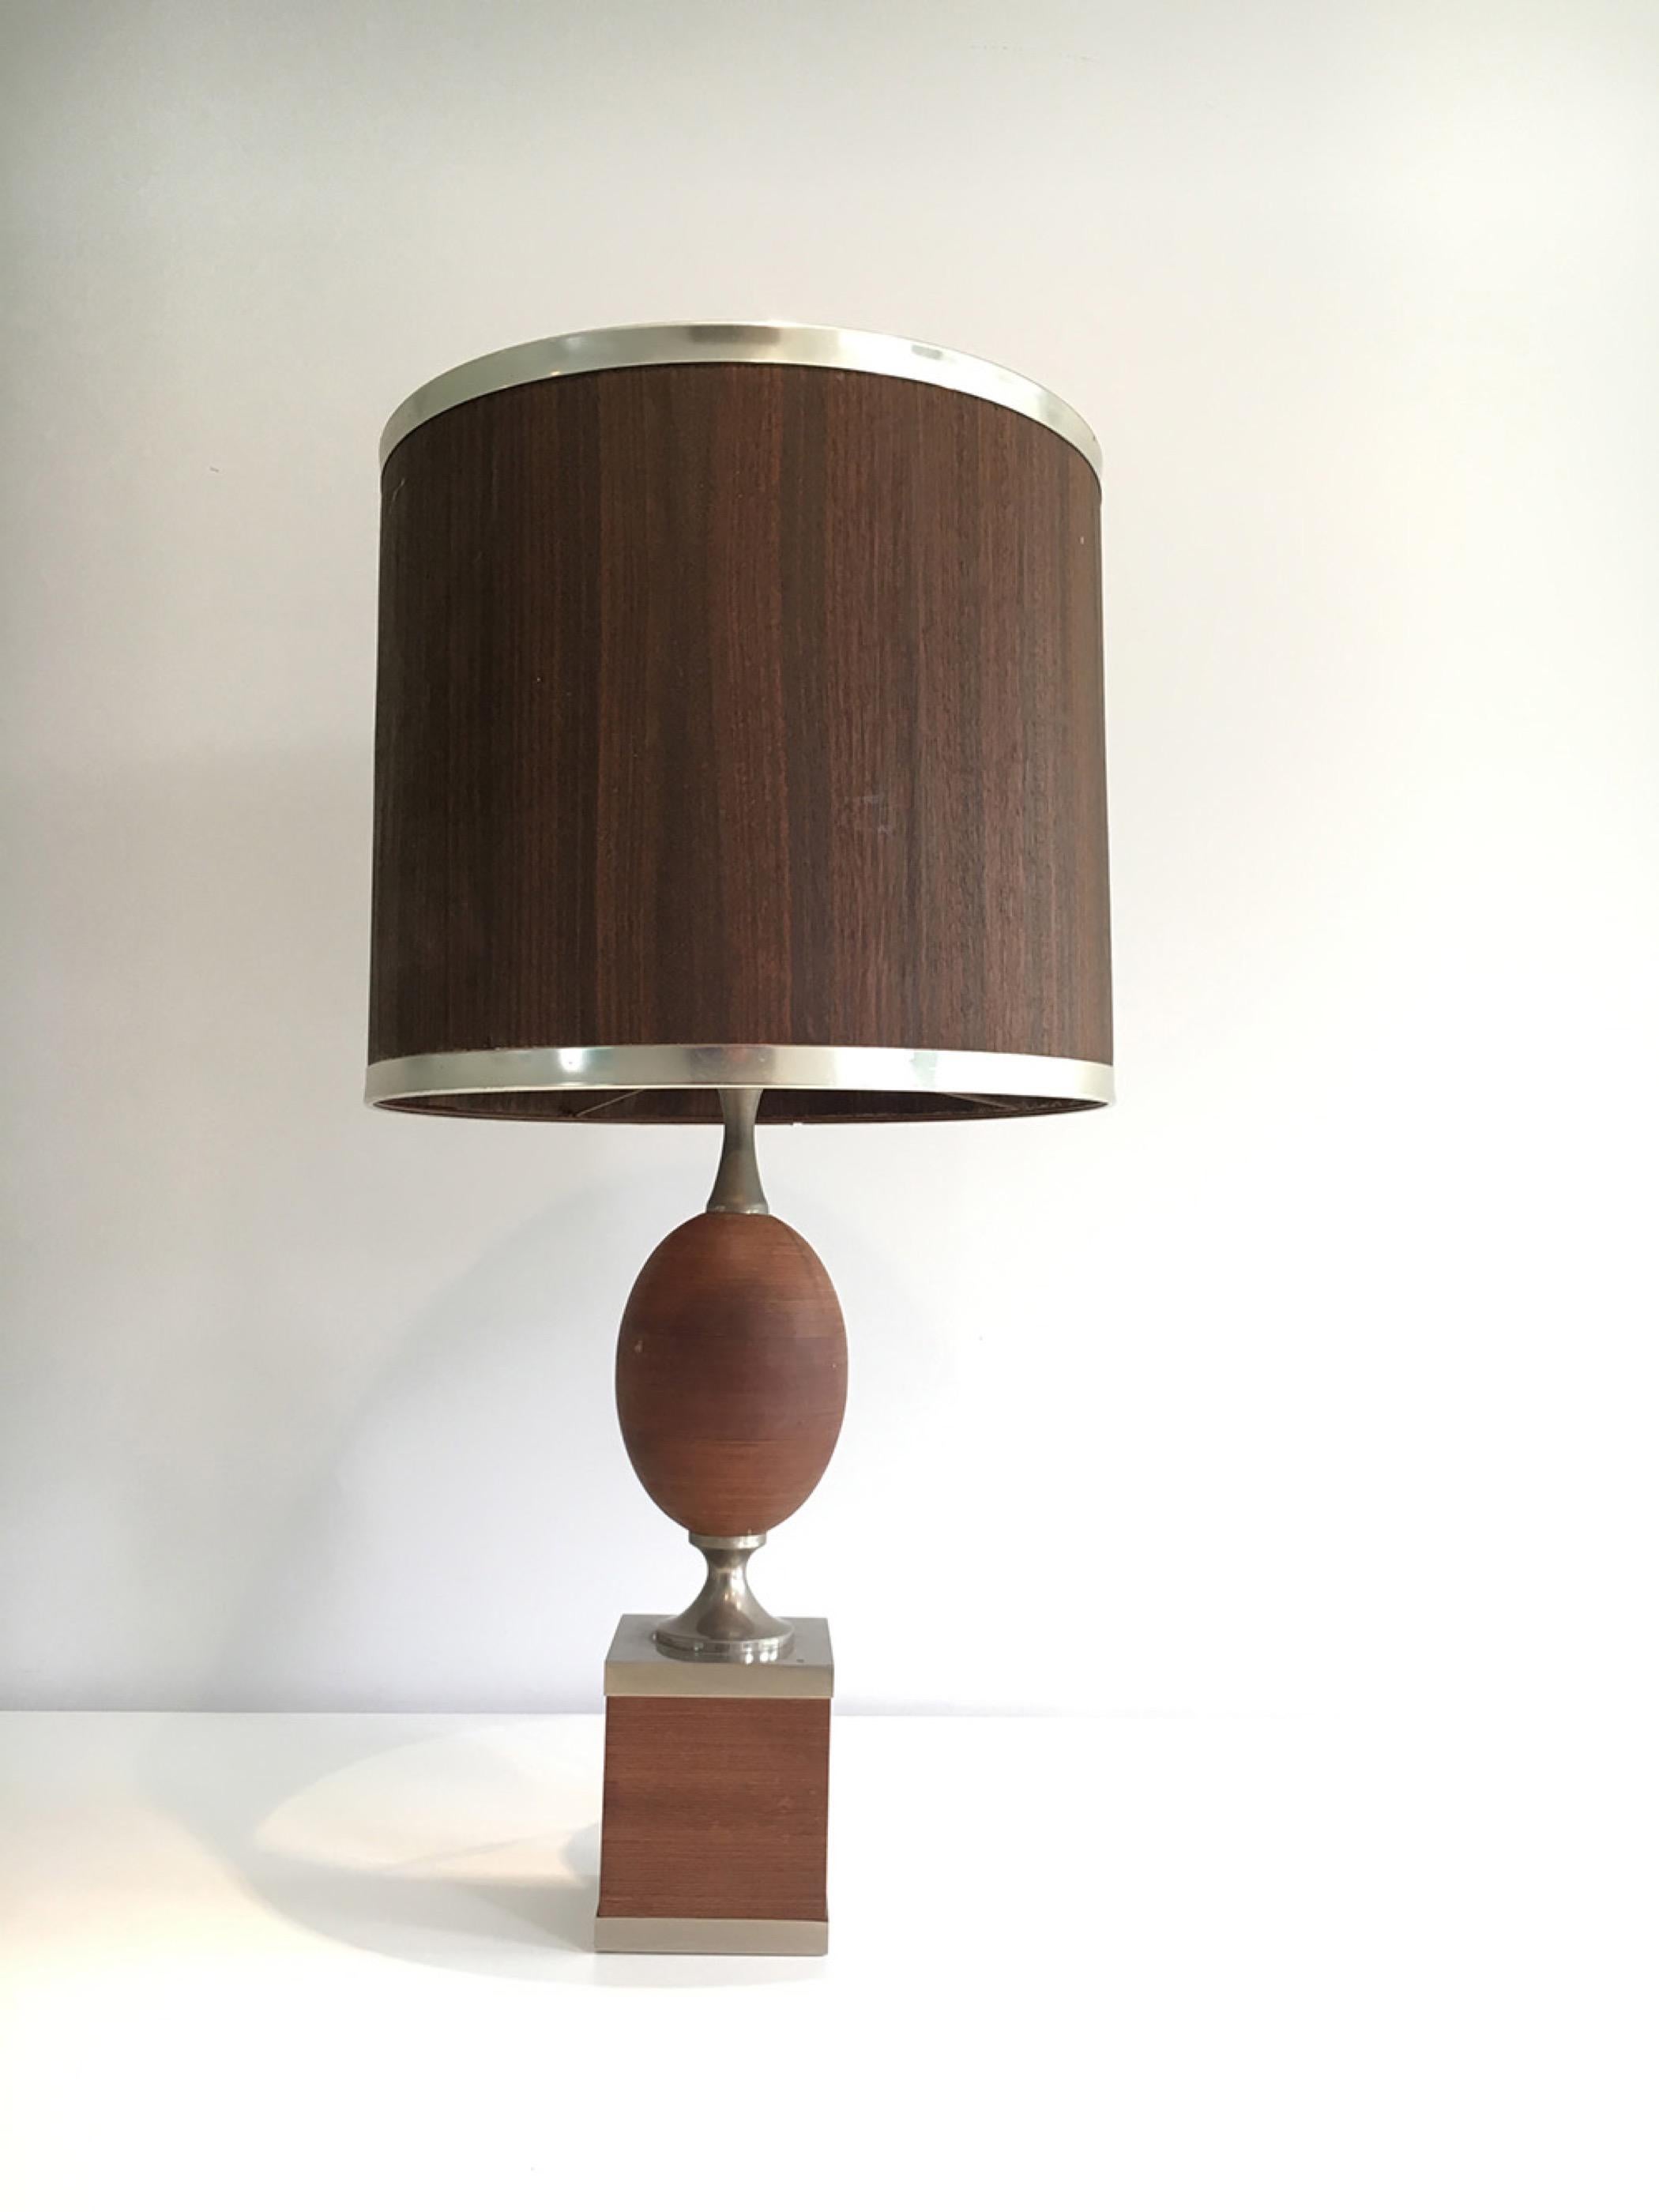 Wood and Brushed Steel Egg Lamp with Wooden Shade, circa 1970 For Sale 10